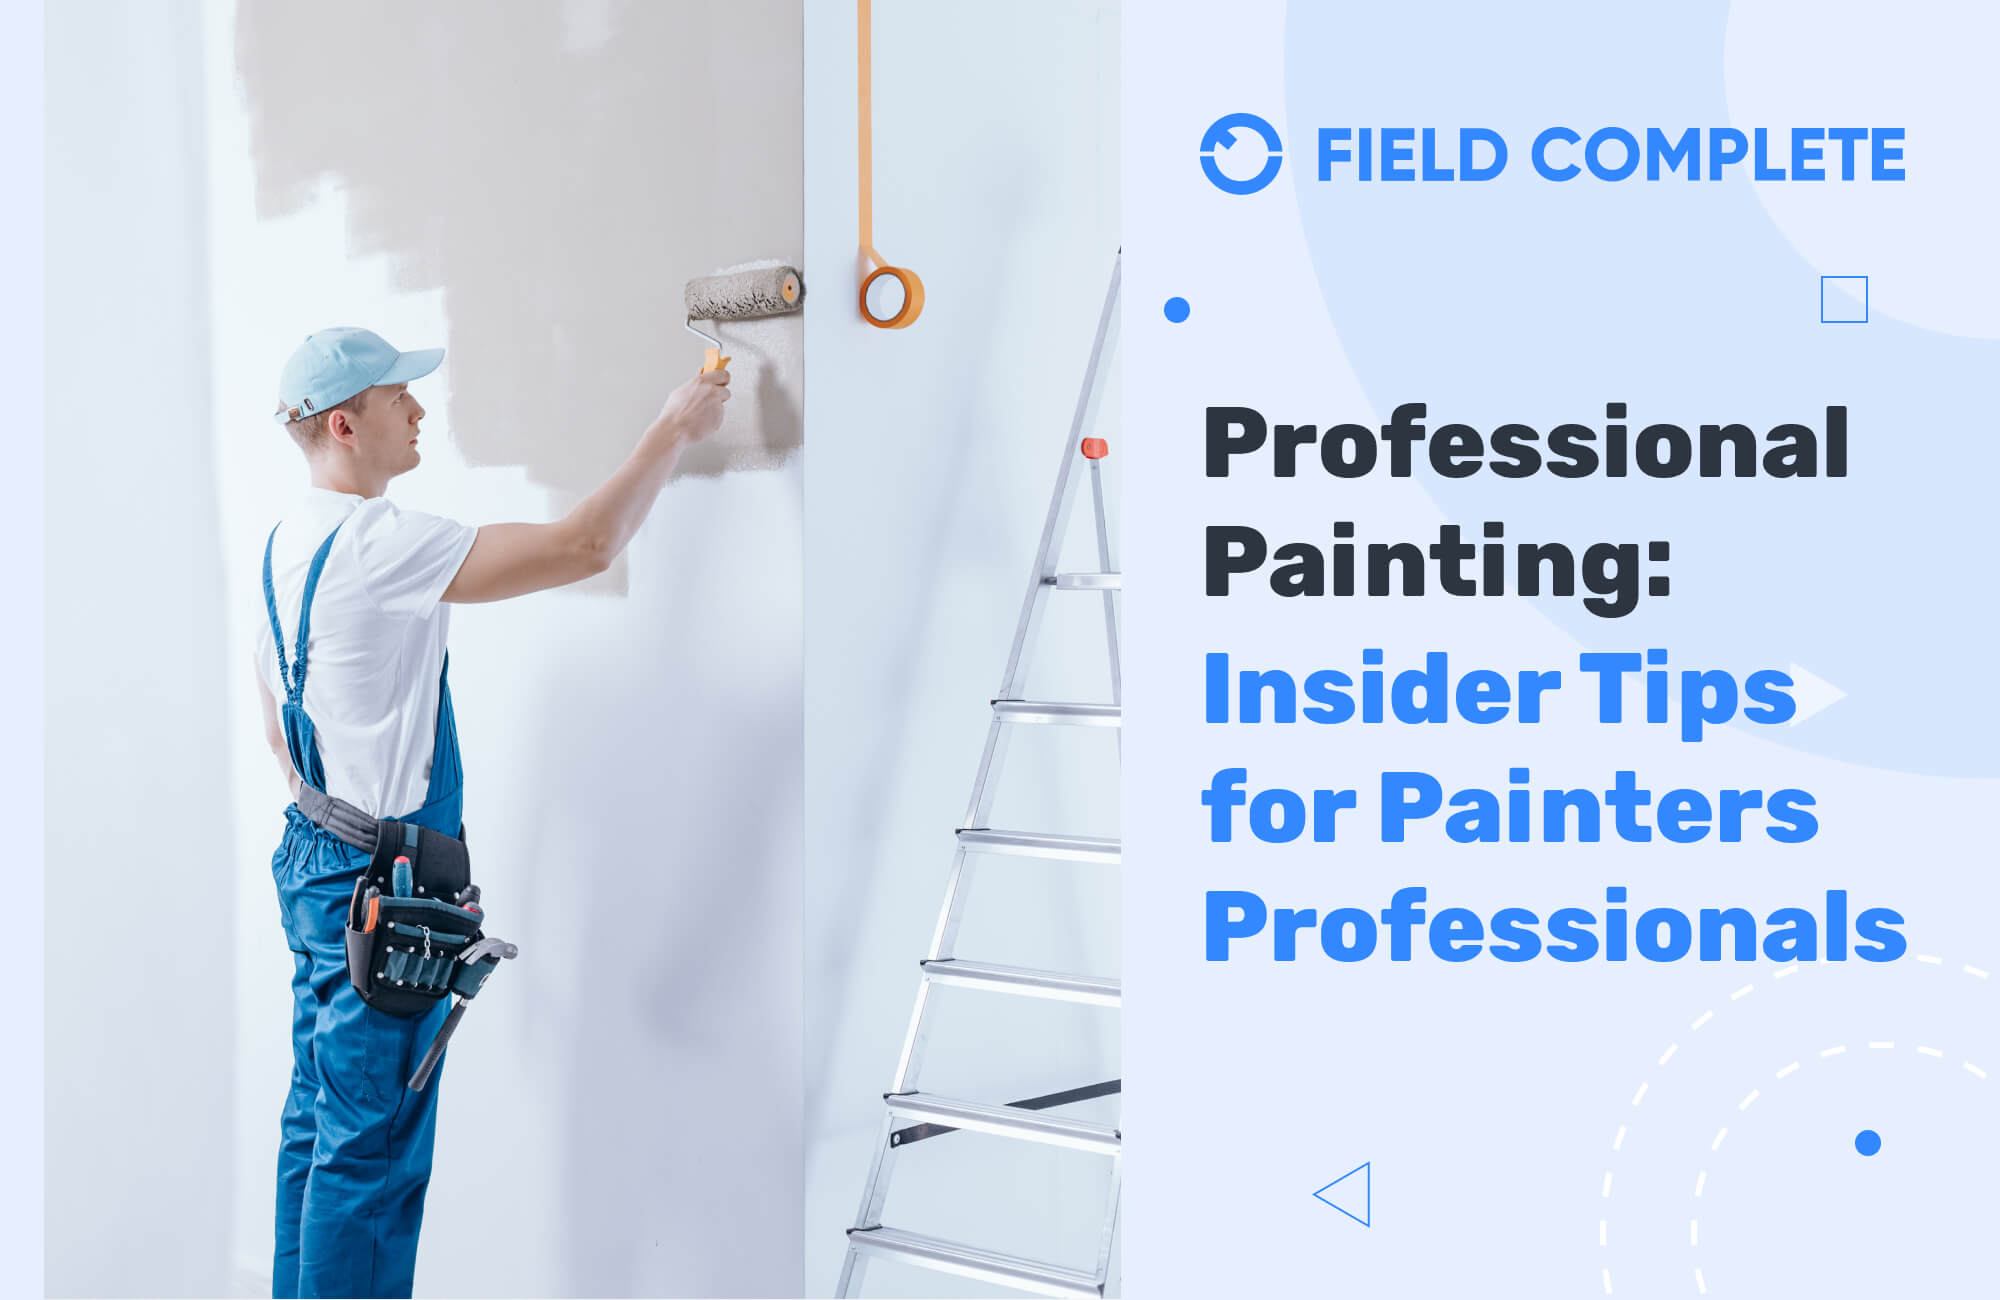 Professional Painting: Insider Tips for Painters Professionals